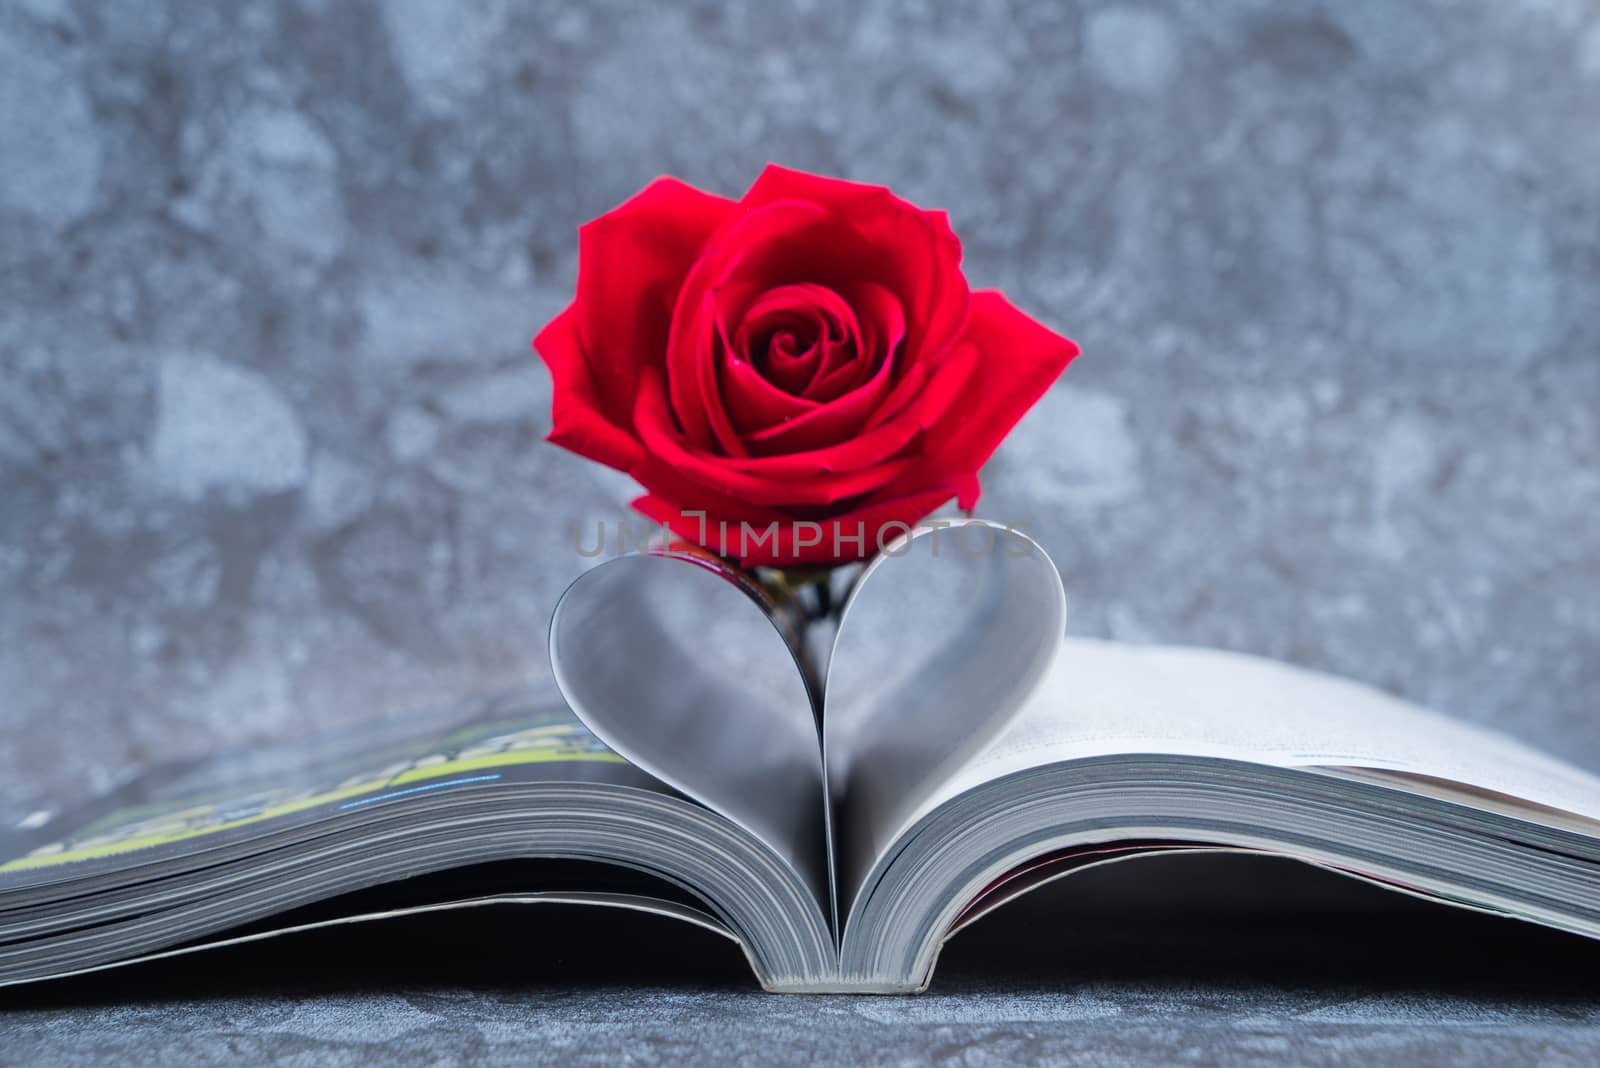 Rose placed on the books page that is bent into a heart shape on granite rock background